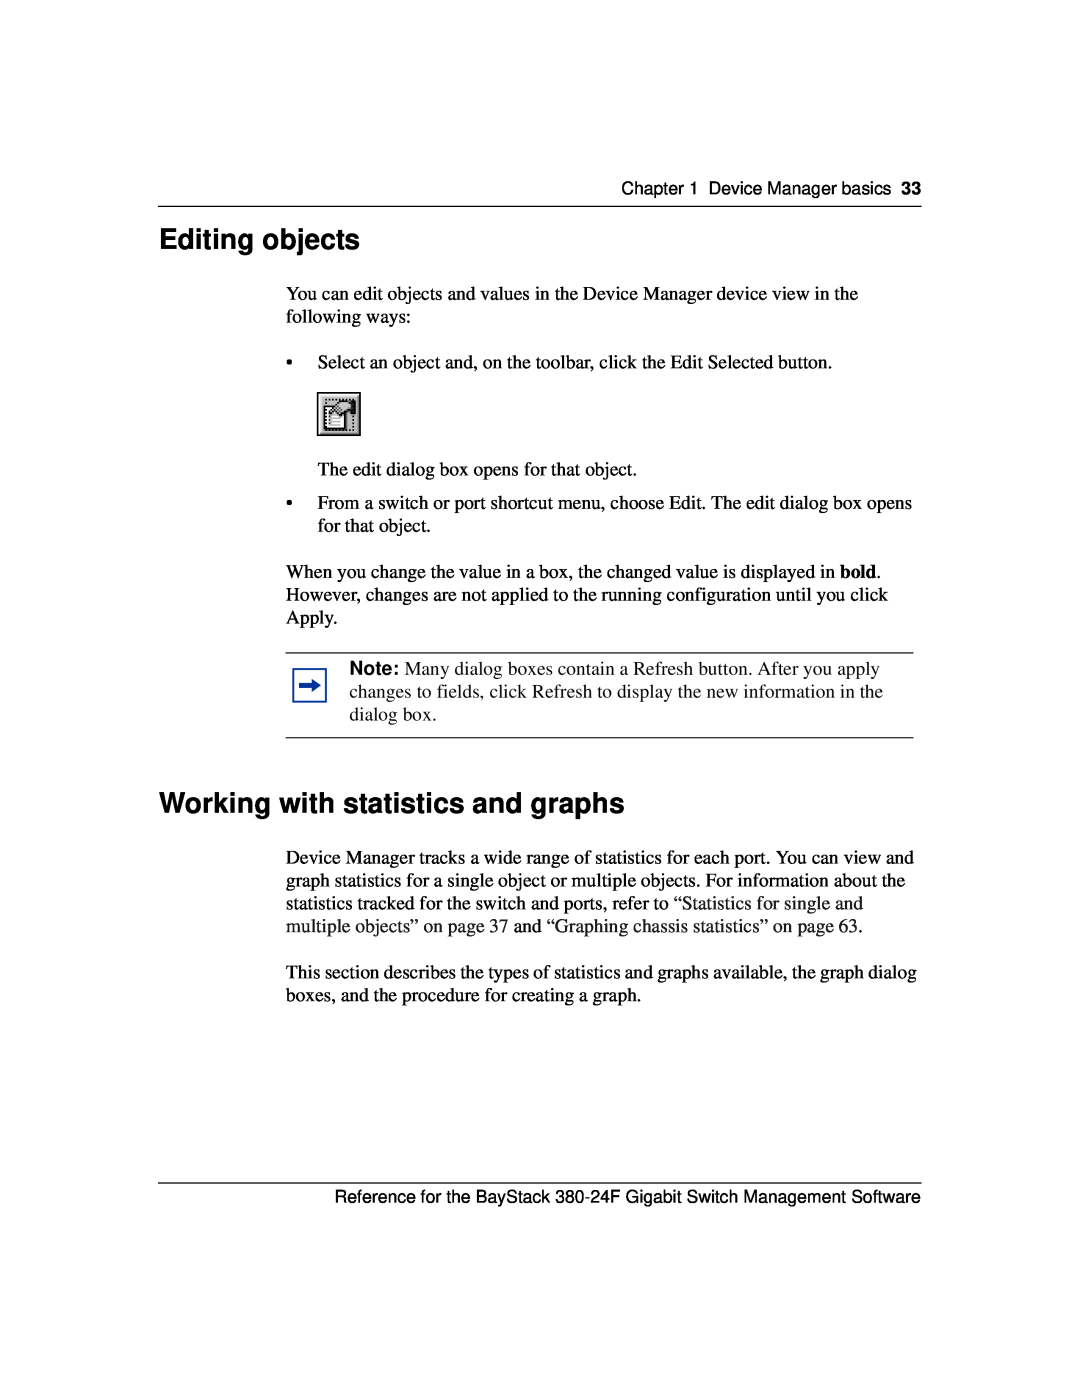 Nortel Networks 214393-A manual Editing objects, Working with statistics and graphs 